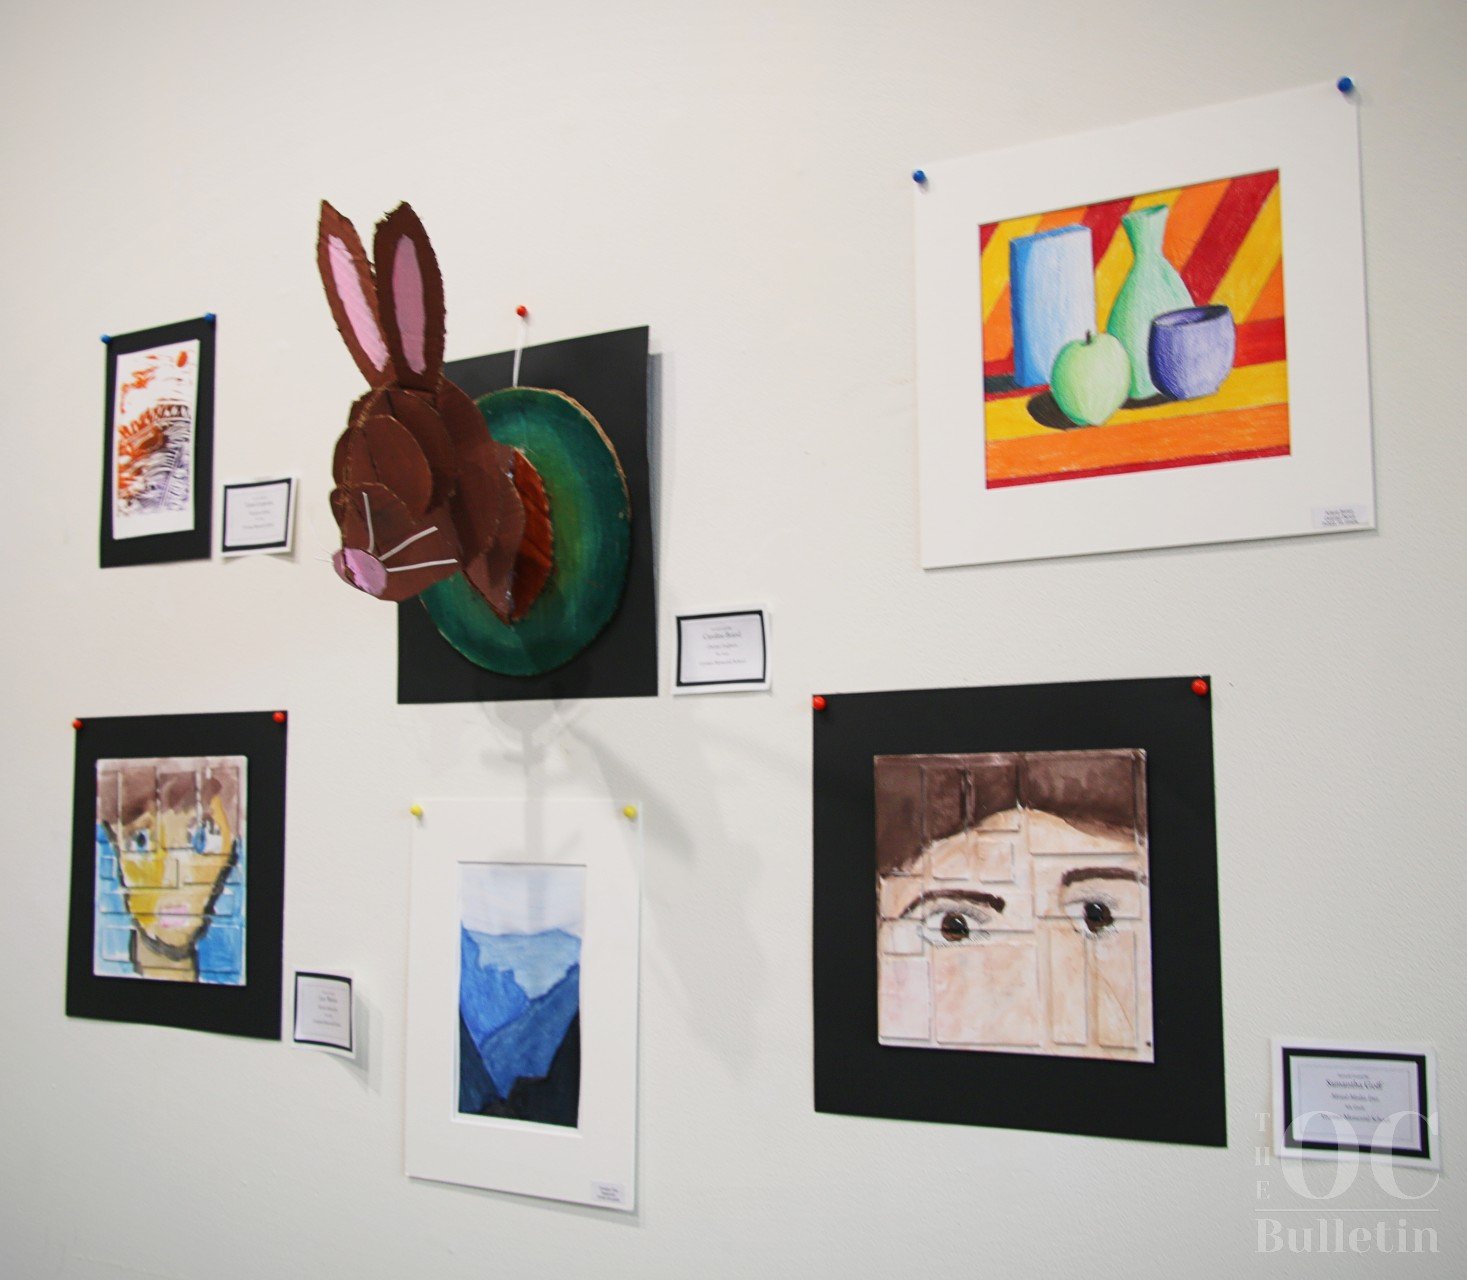  The “Young Visions” exhibit features student artwork from each of the nine Orange County public schools as well as Grymes Memorial School. (Photo Credit: Andra Landi) 